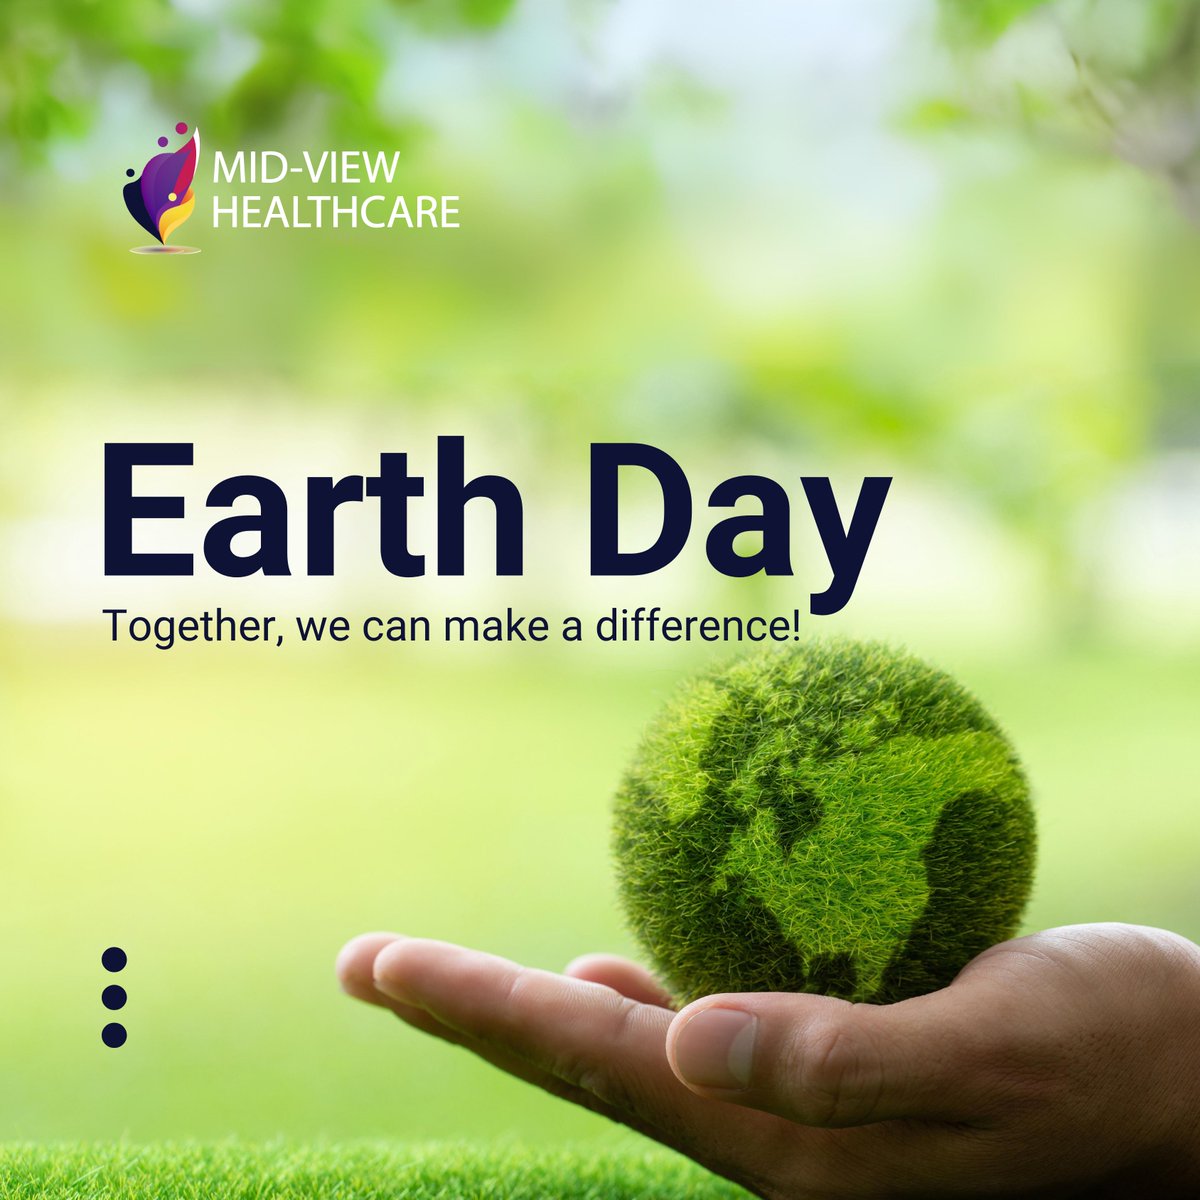 Happy Earth Day! Let's unite our efforts to protect our planet. Together, we can make a difference! 
.
.
.
.
 #earthday #togetherforchange #midview #care